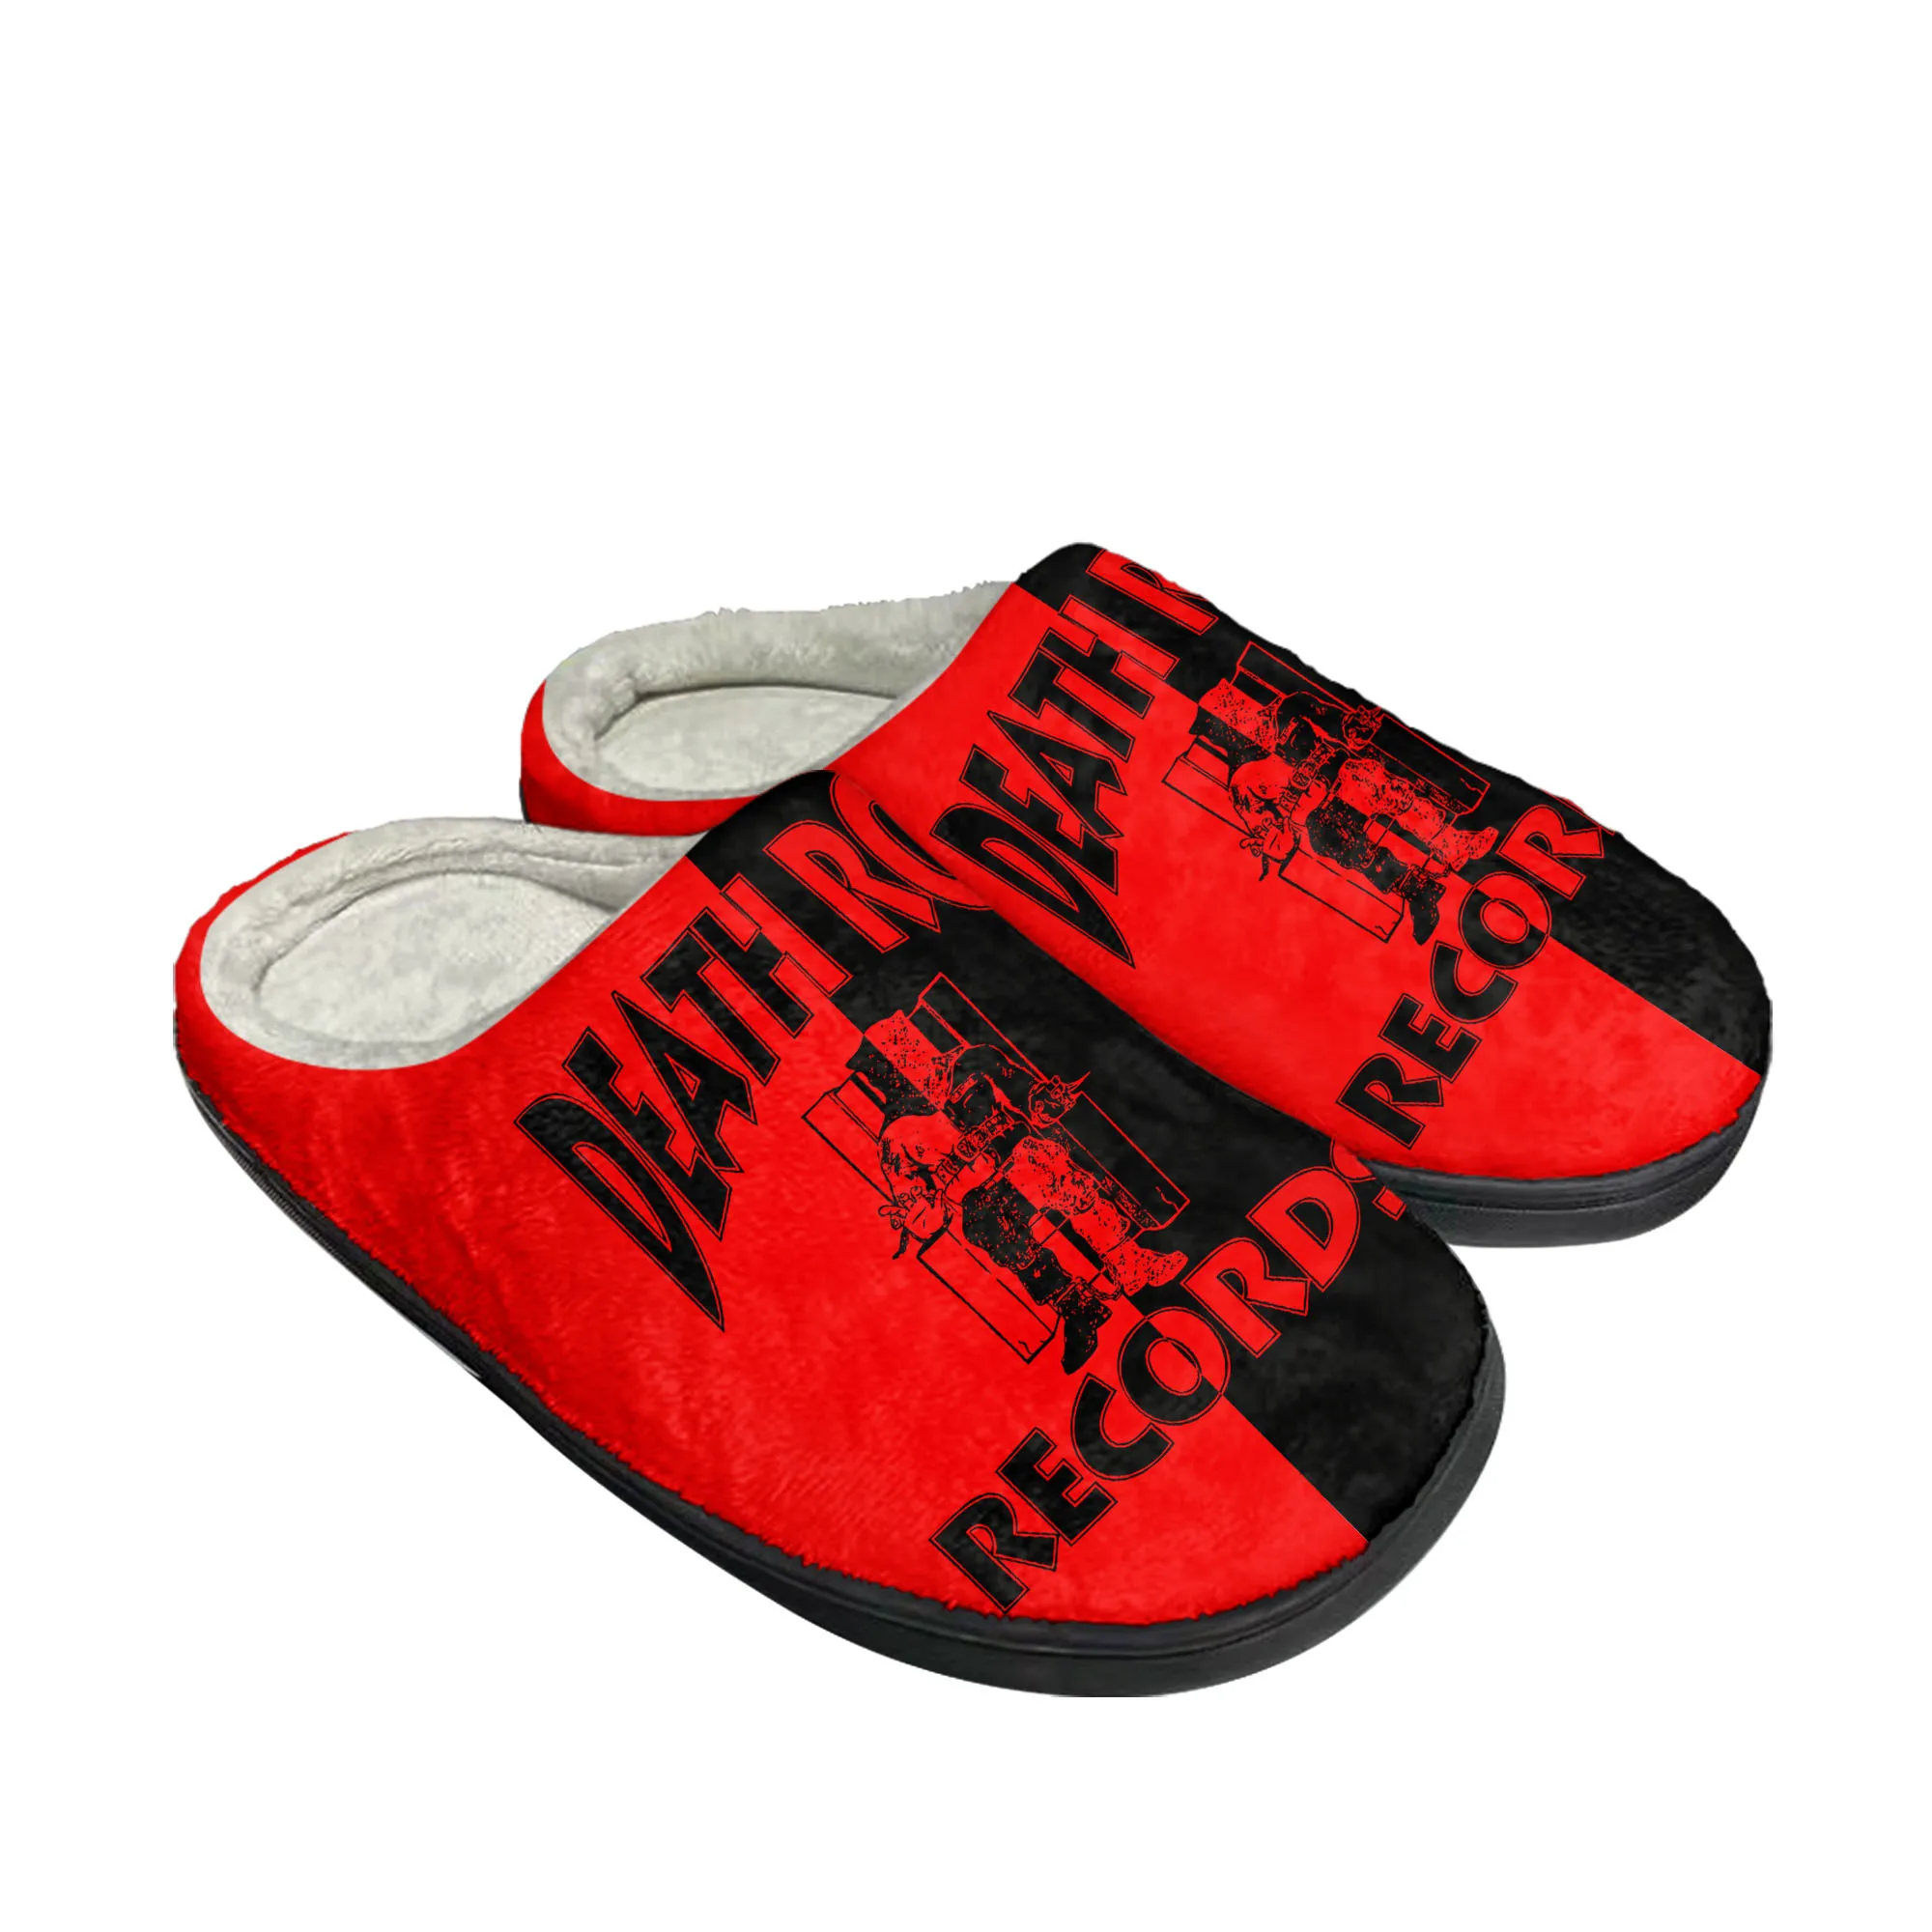 Death Row Records Home Cotton Custom Slippers Mens Womens Sandals Plush Pattern Non-Slip Casual Keep Warm Shoes Thermal Slipper